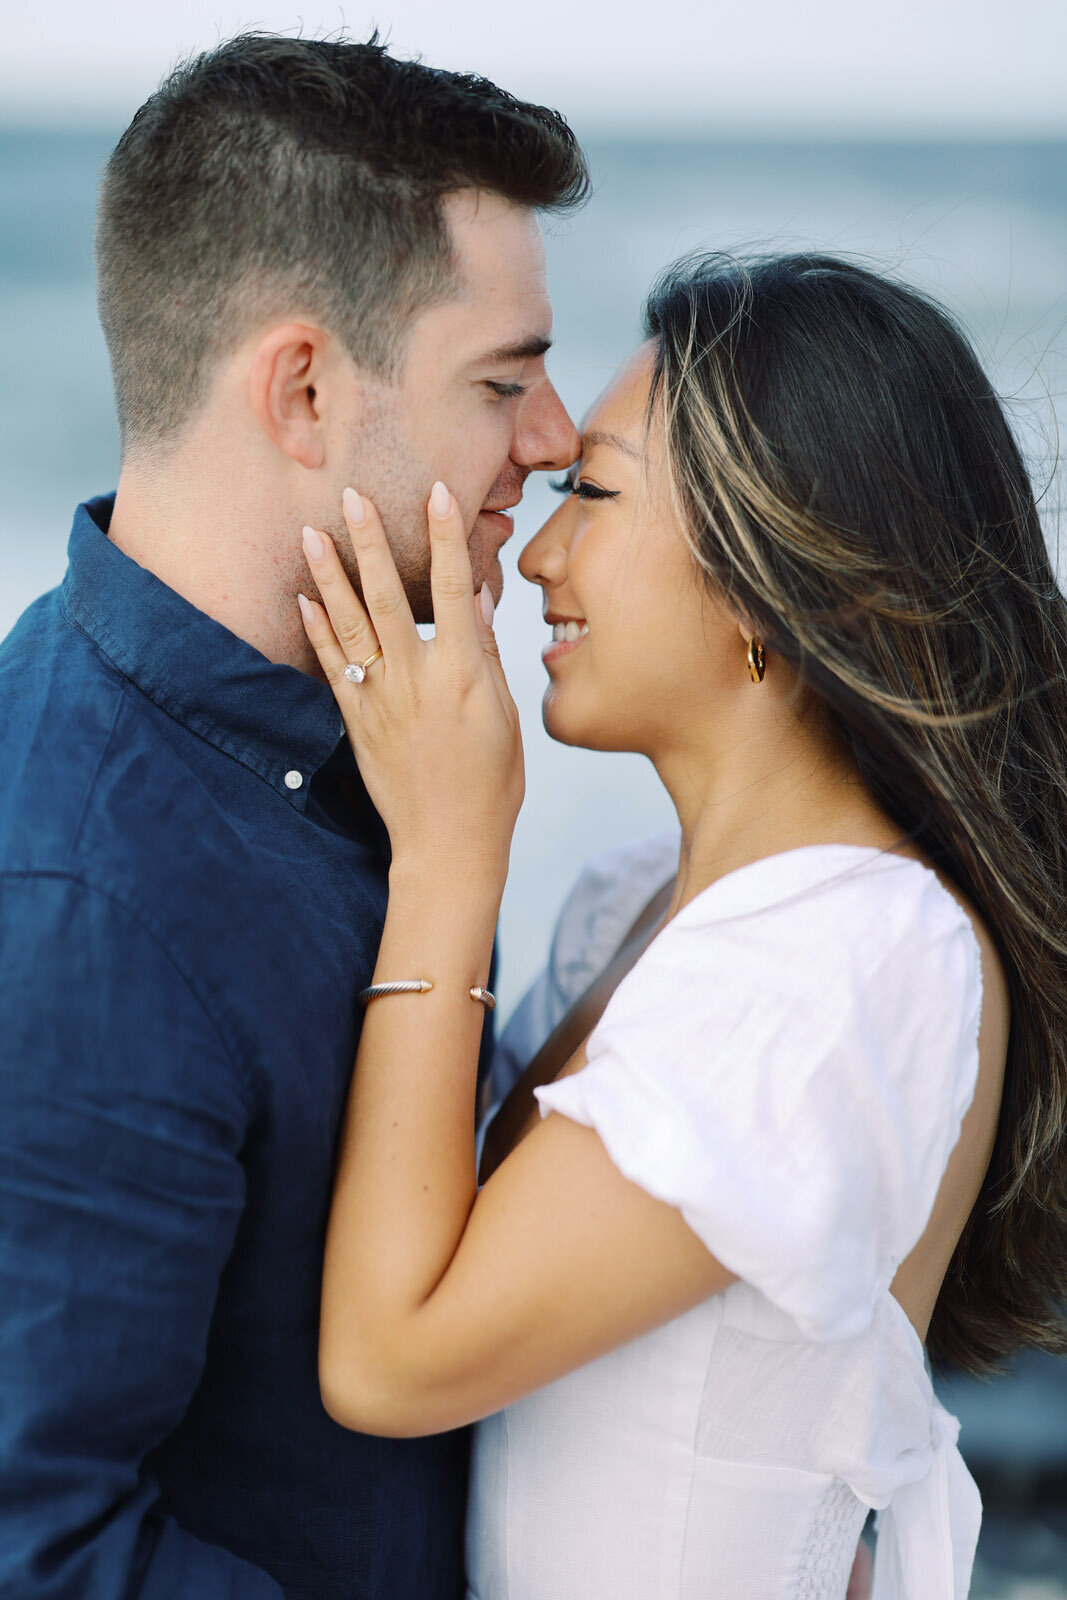 Romantic film beach engagement photography session in Cape May, New Jersey.